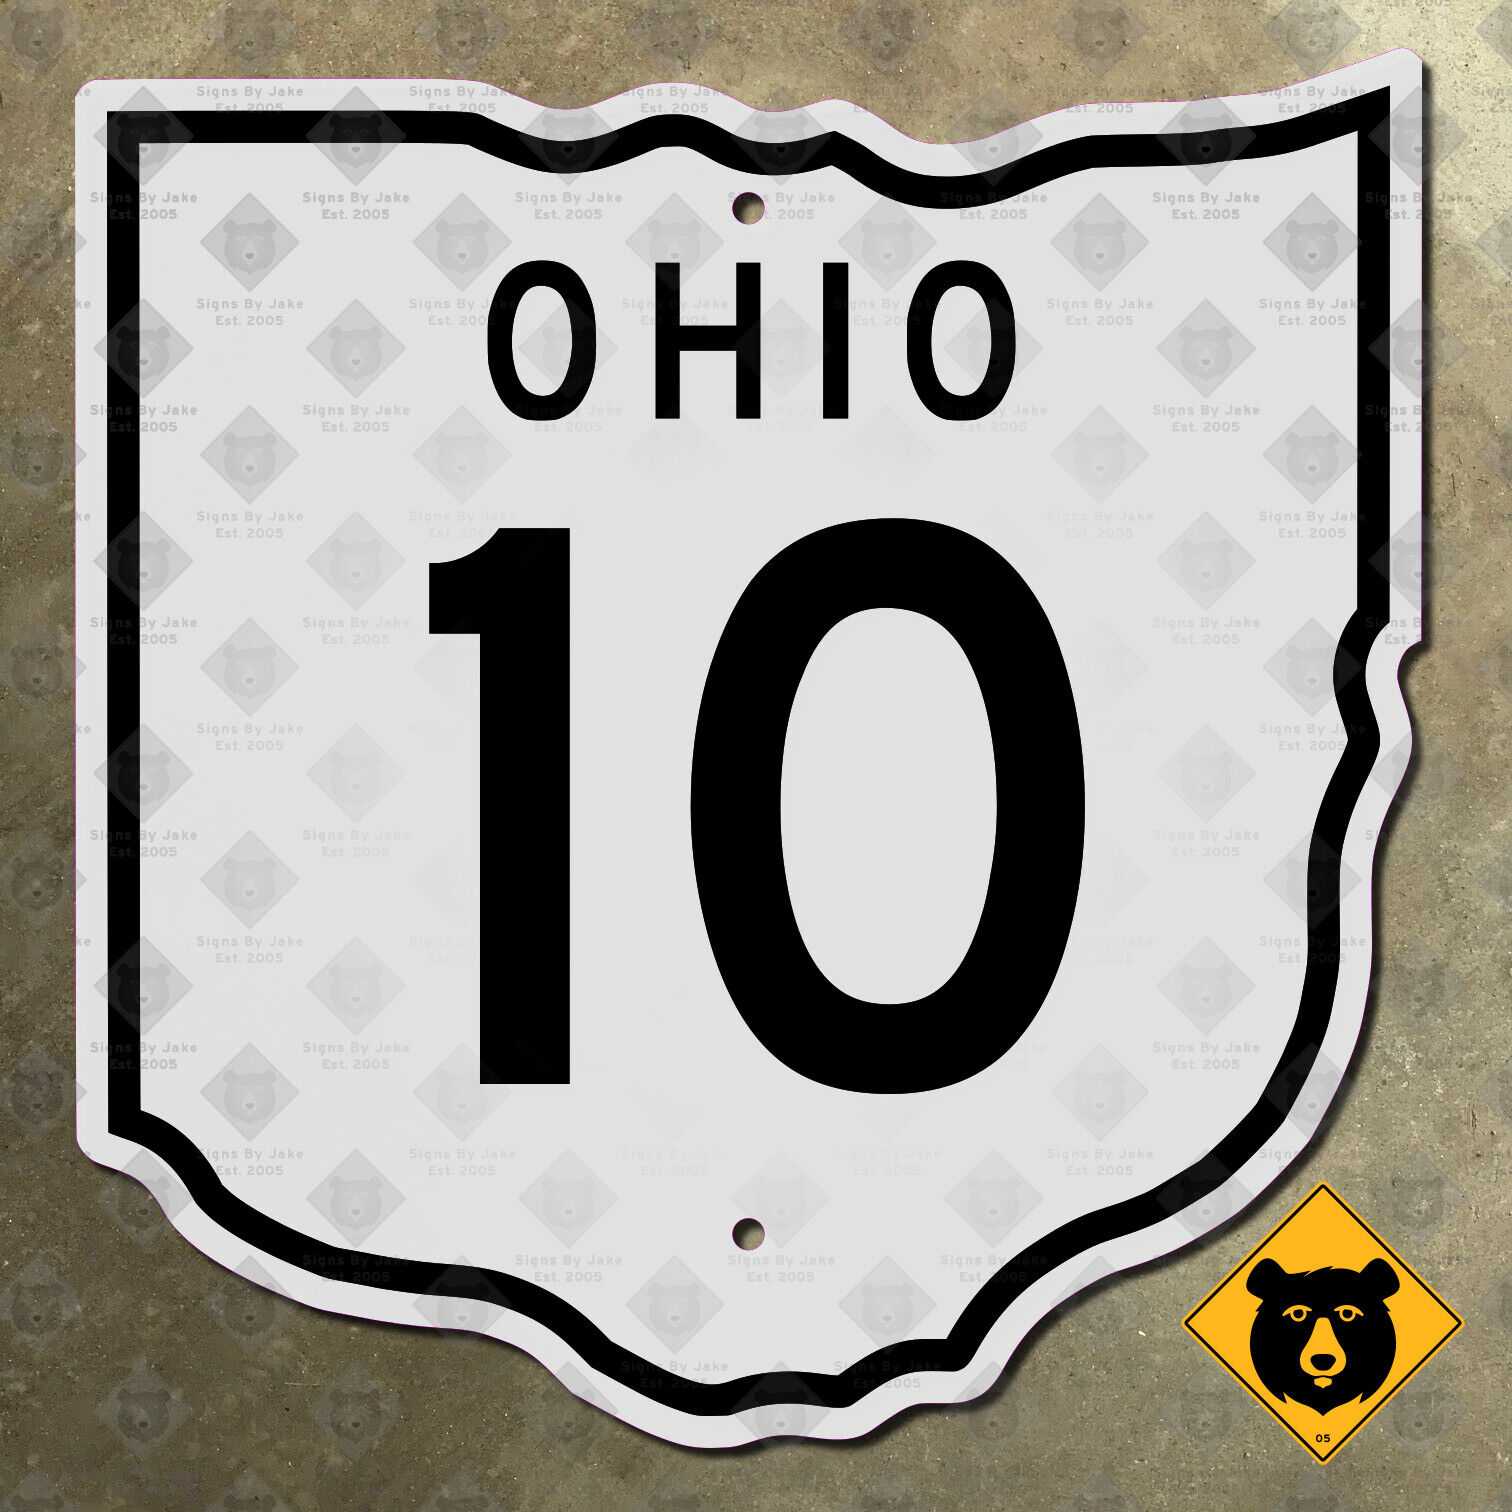 Ohio State Route 10 highway road sign 1952 Cleveland North Ridgeville 15x16